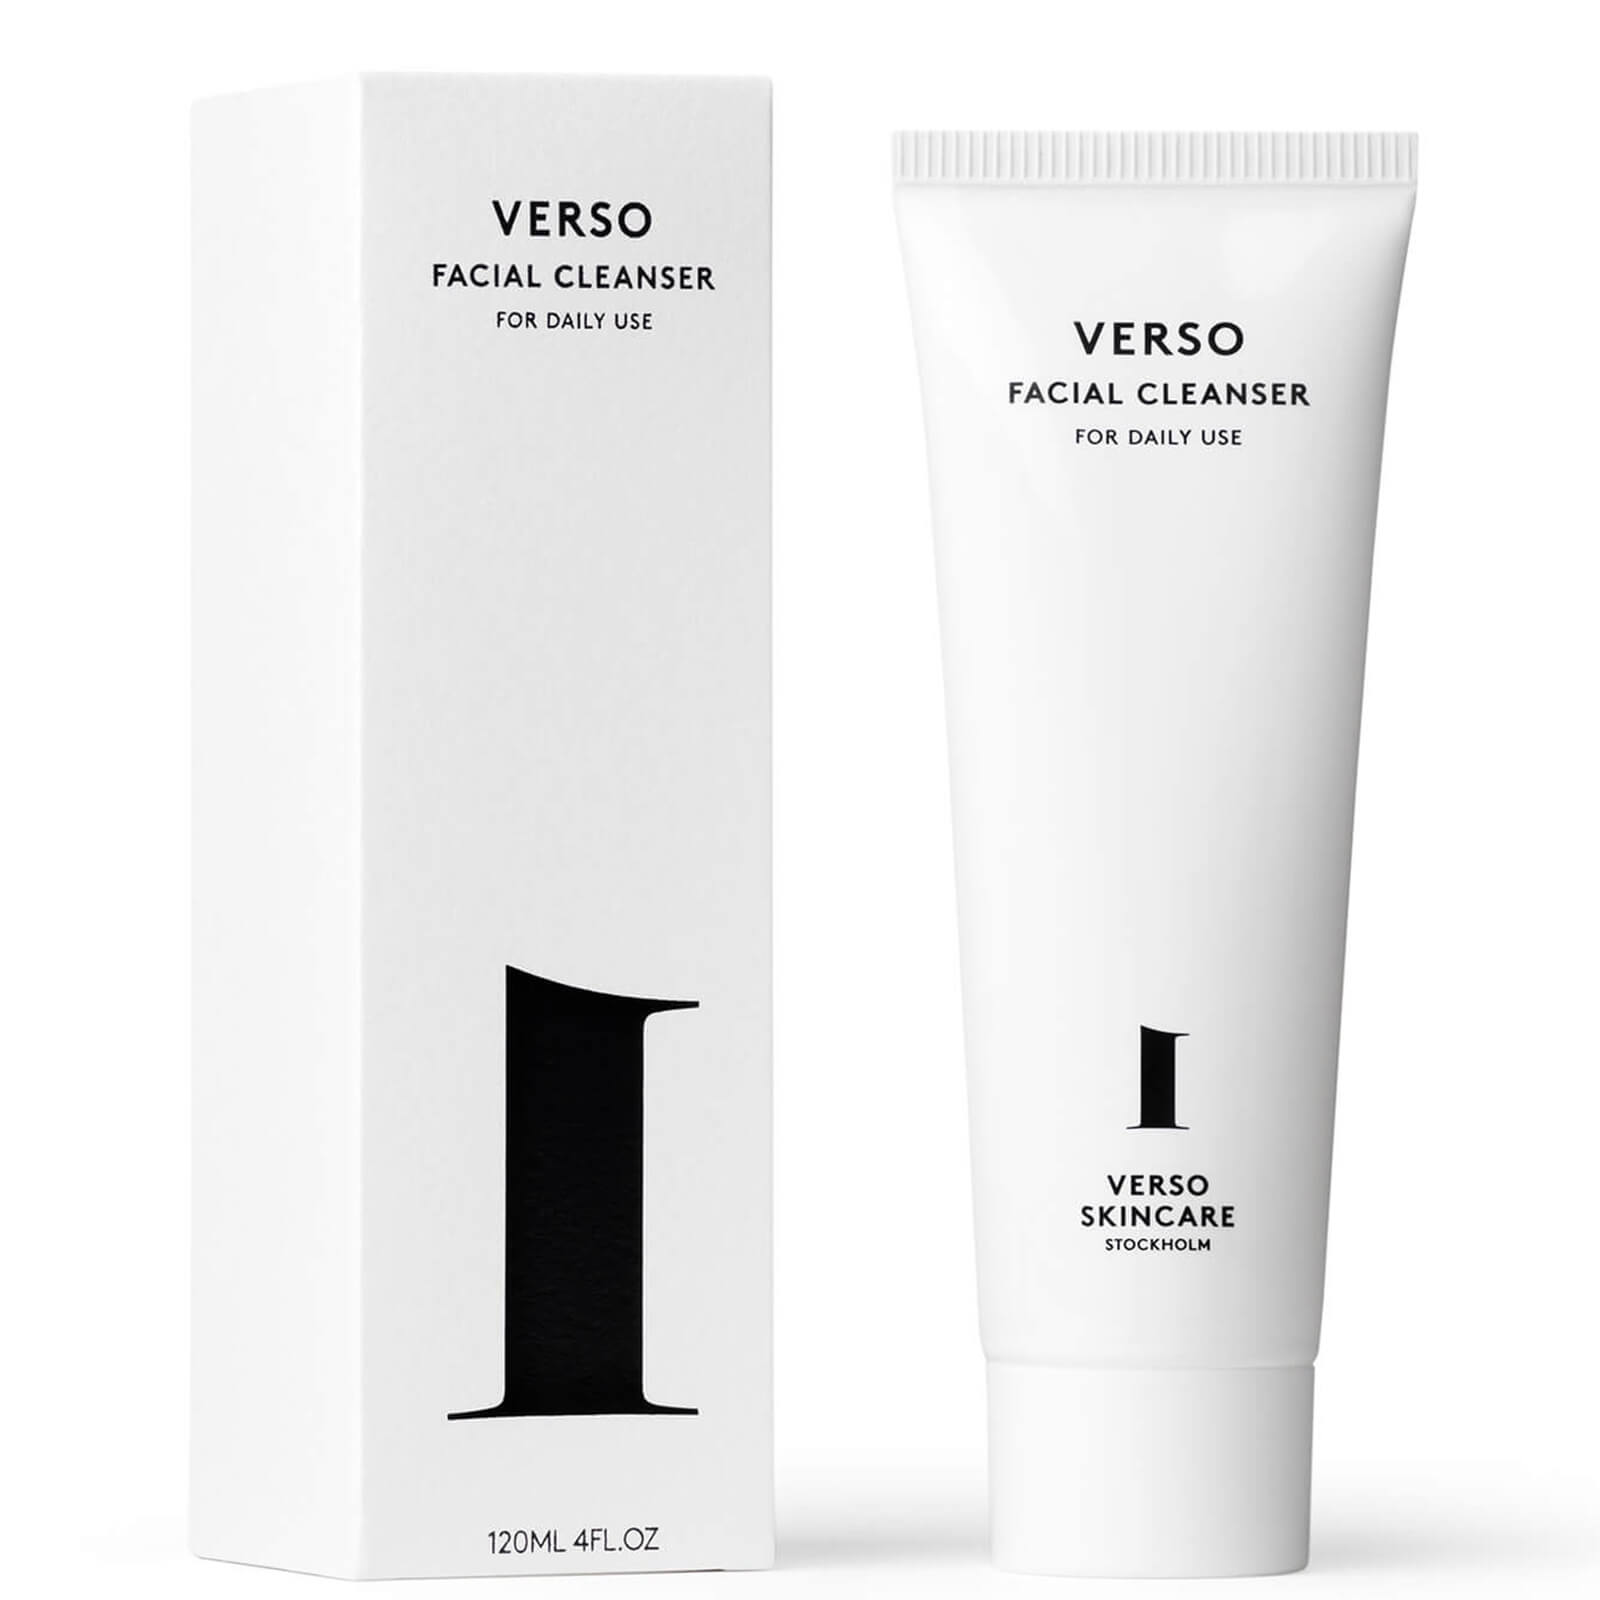 Photos - Facial / Body Cleansing Product Verso Facial Cleanser 120ml 2012014 